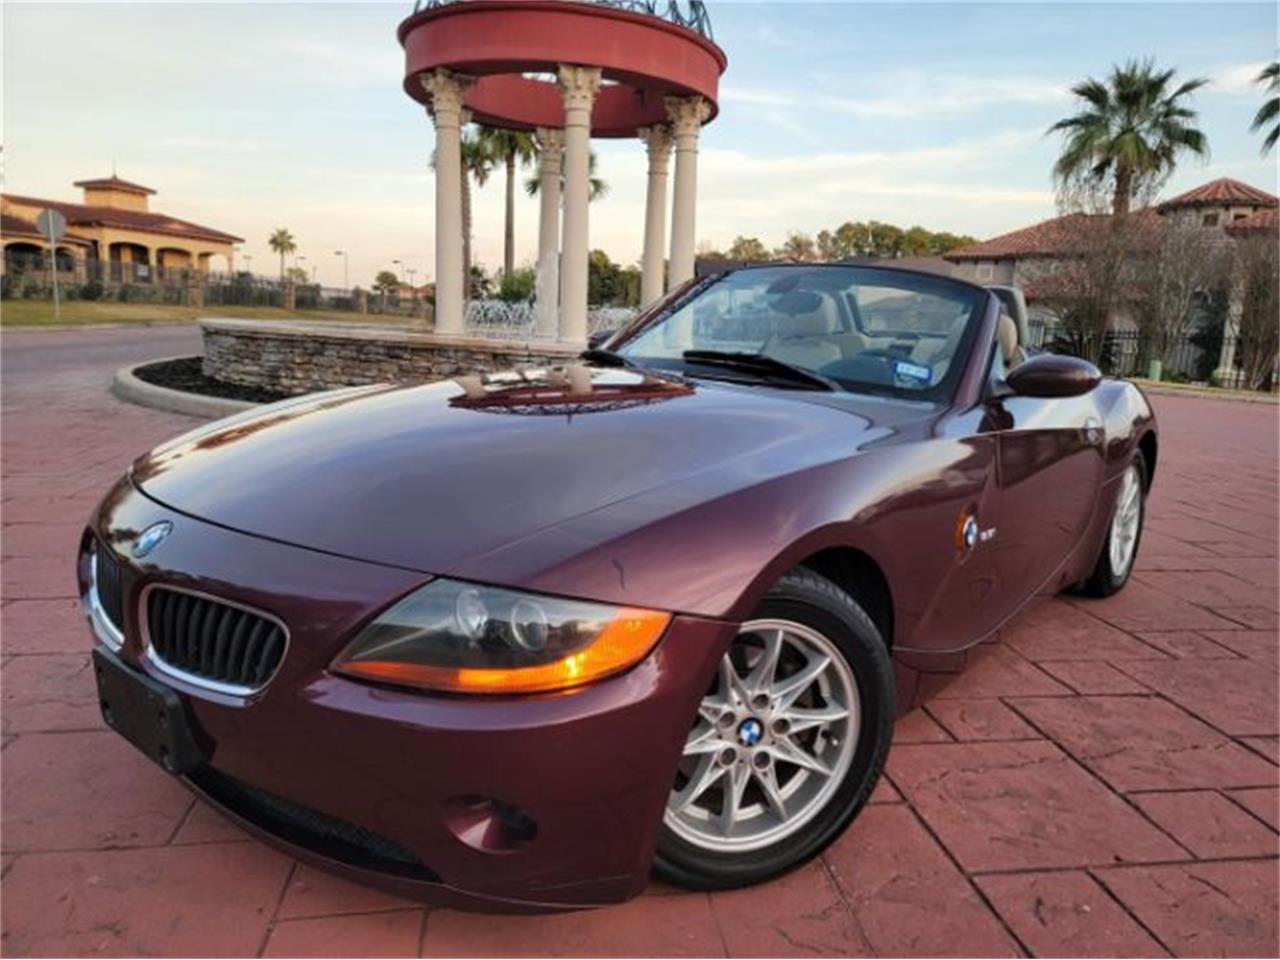 For Sale: 2003 BMW Z4 in Cadillac, Michigan for sale in Cadillac, MI